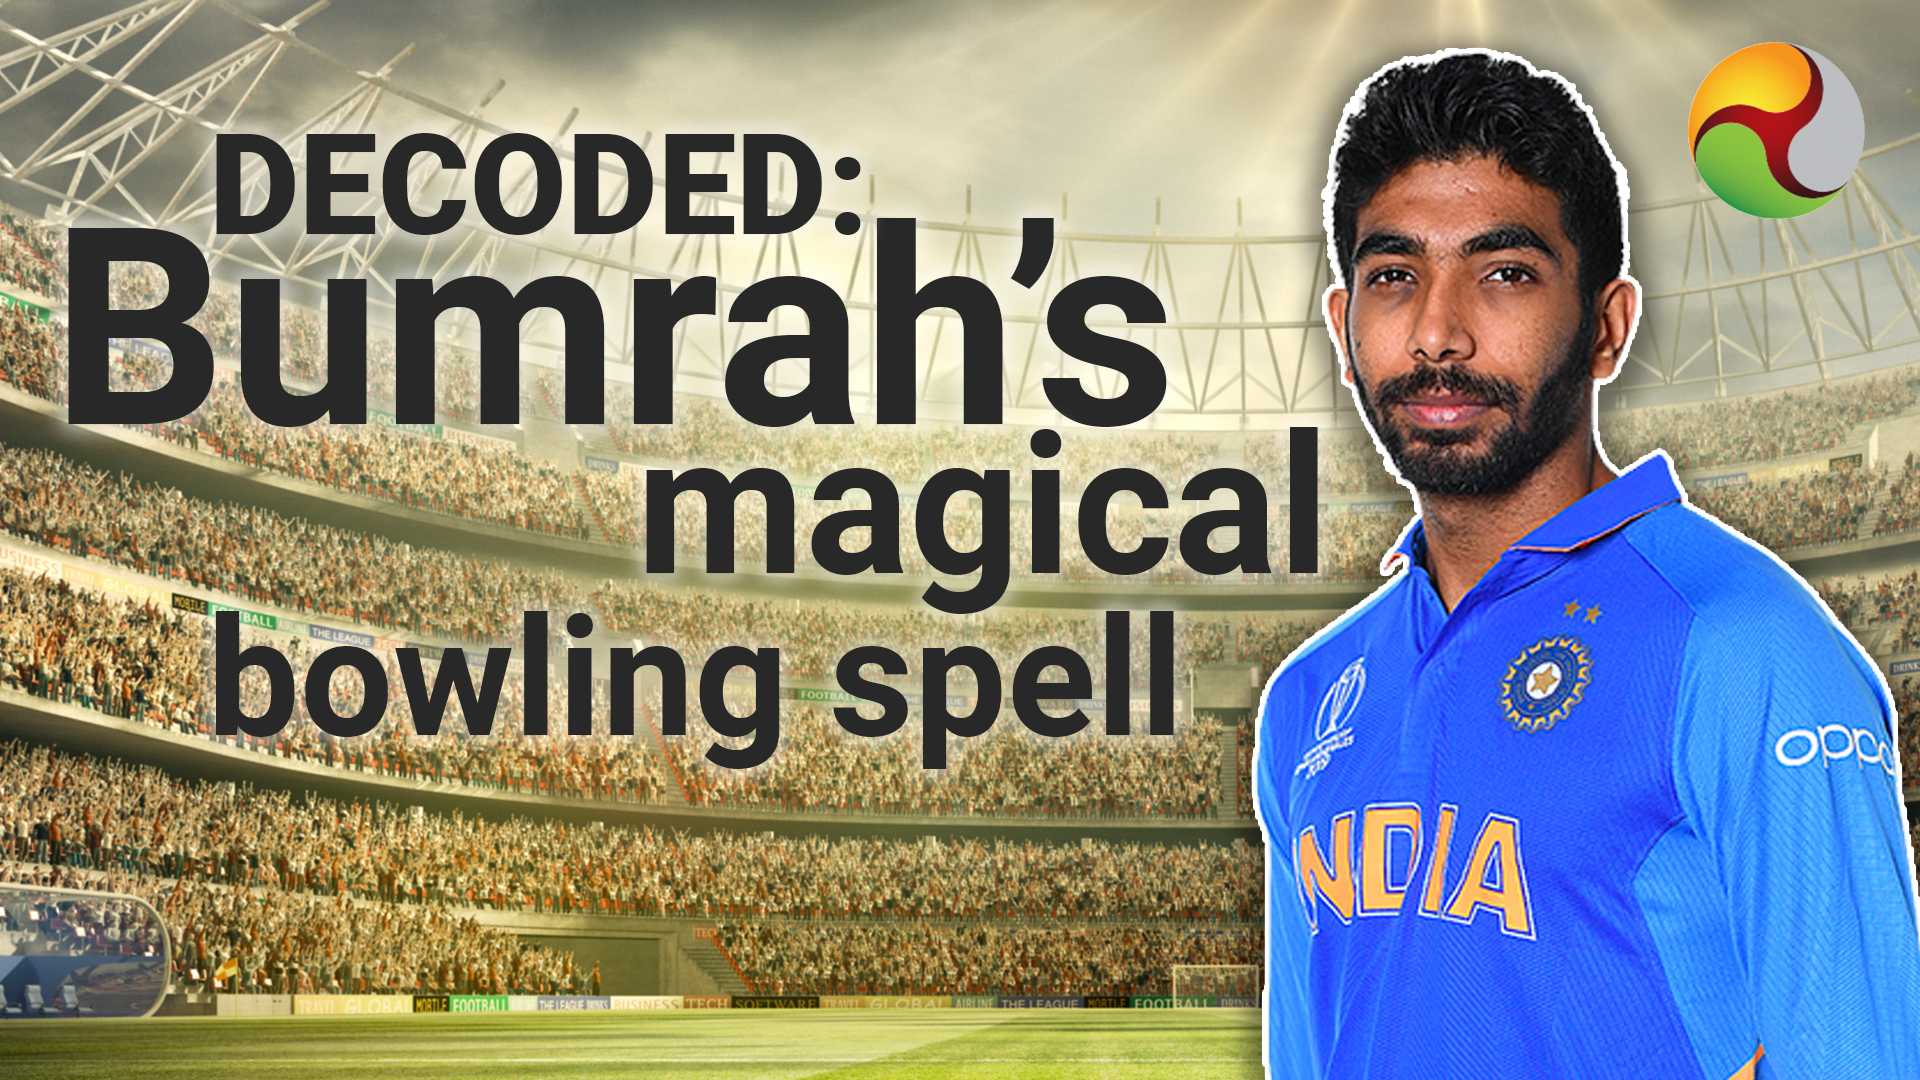 Bumrah’s magical bowling spell decoded